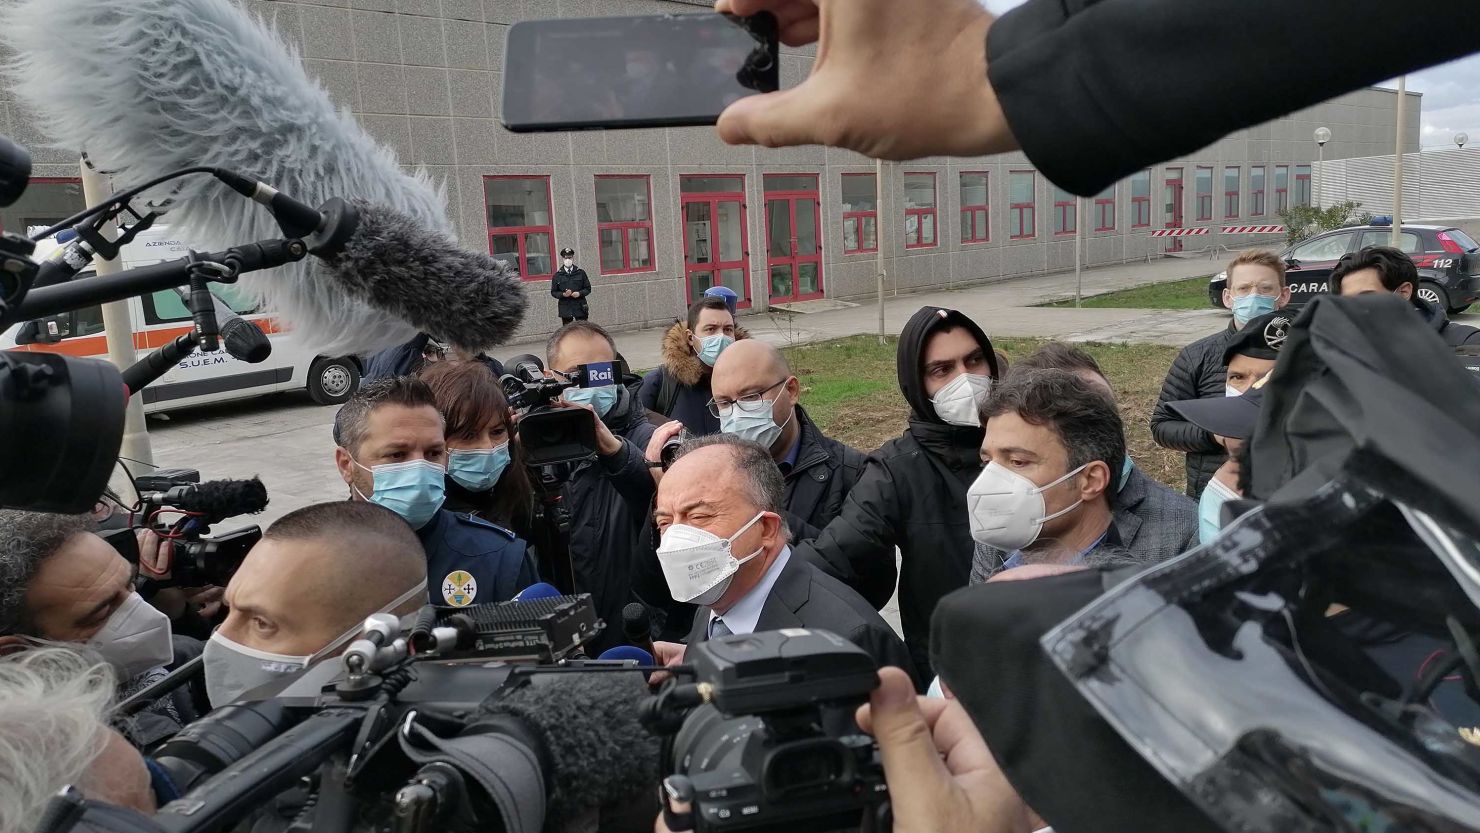 Italian anti-mafia prosecutor Nicola Gratteri, center, is surrounded by media as he arrives for the opening of the trial of more than 350 alleged members of the 'Ndrangheta mafia group and their associates in Calabria.